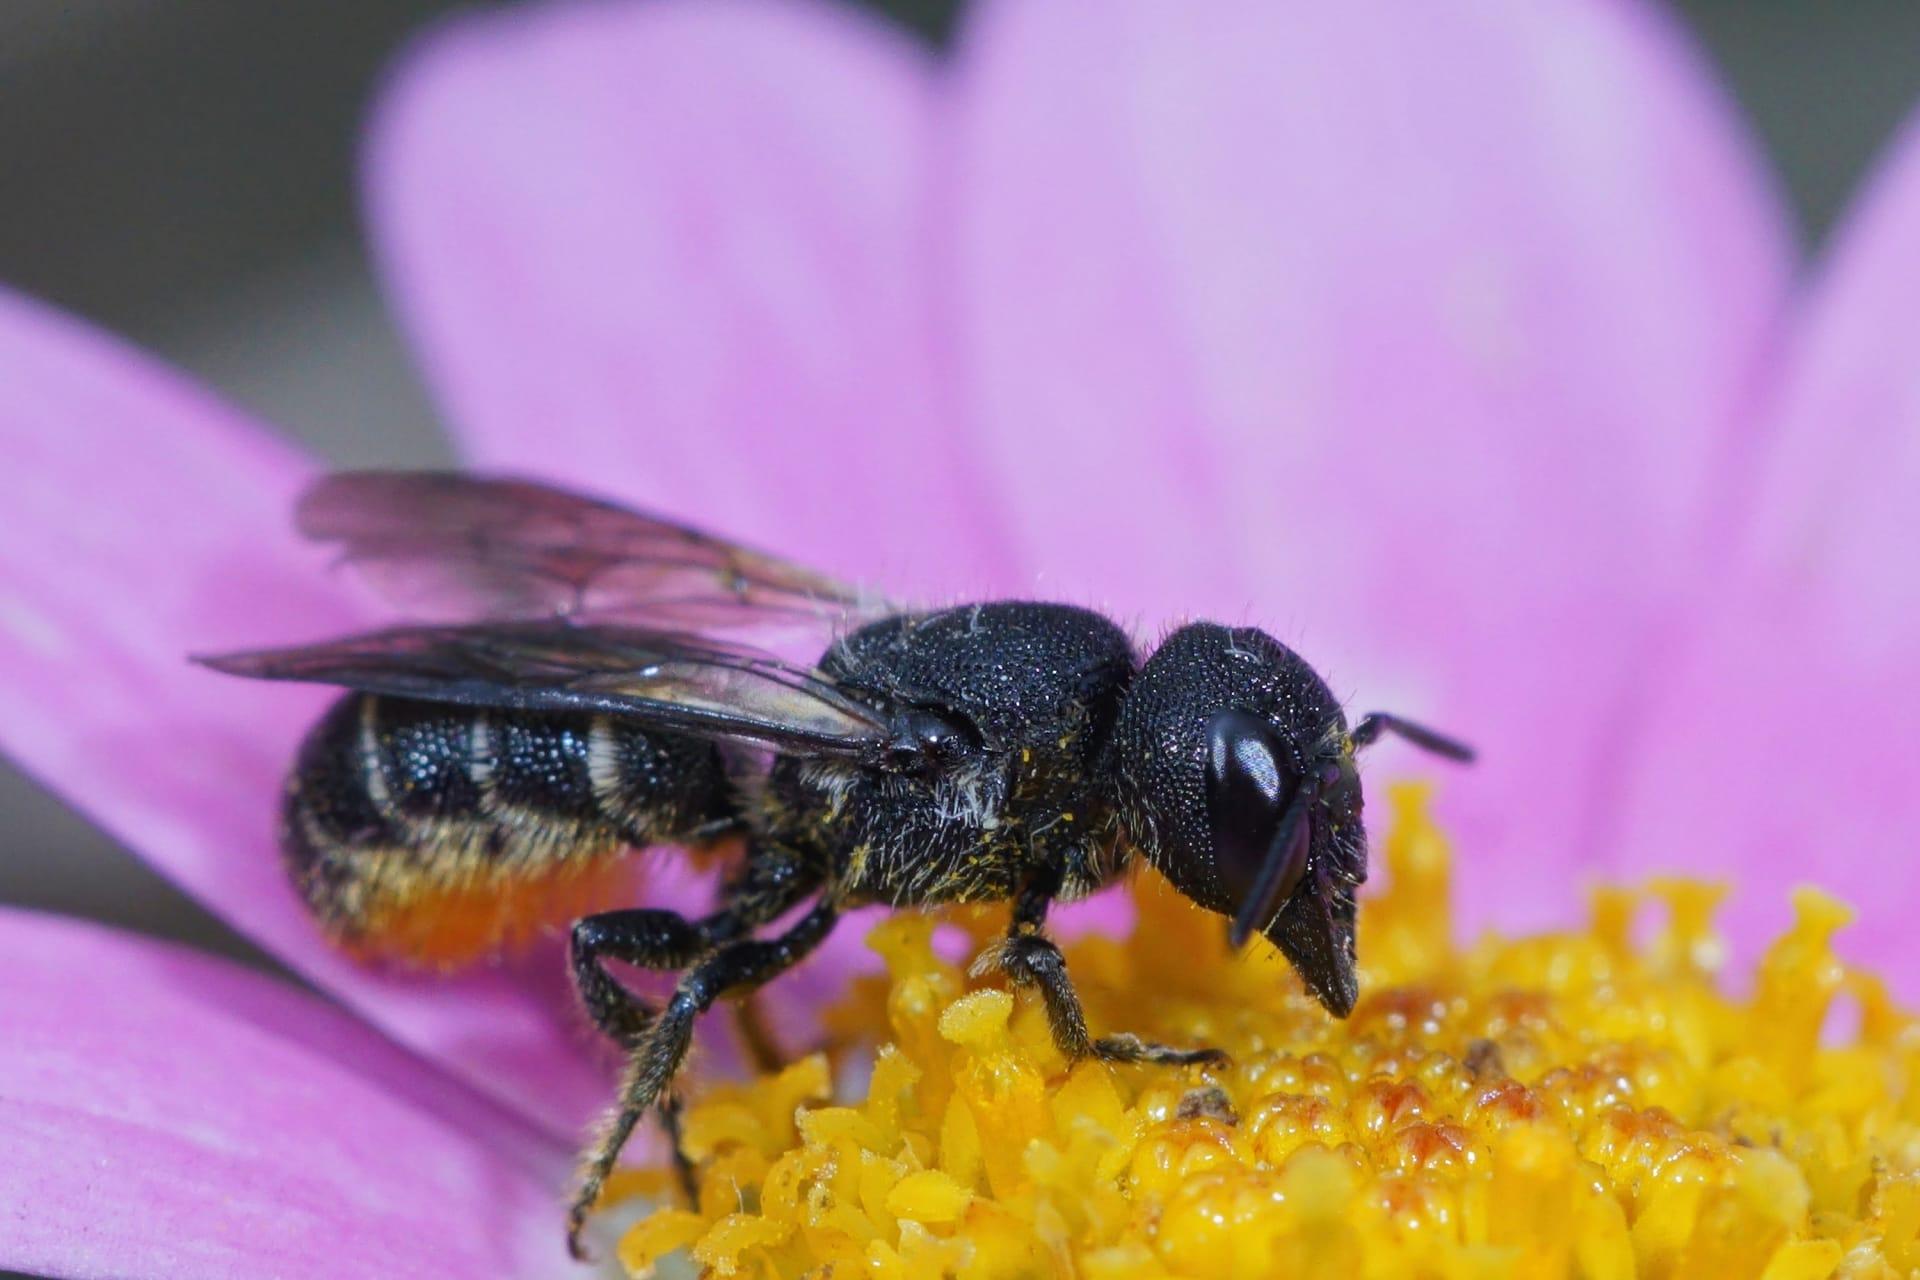 Great black wasp pictures